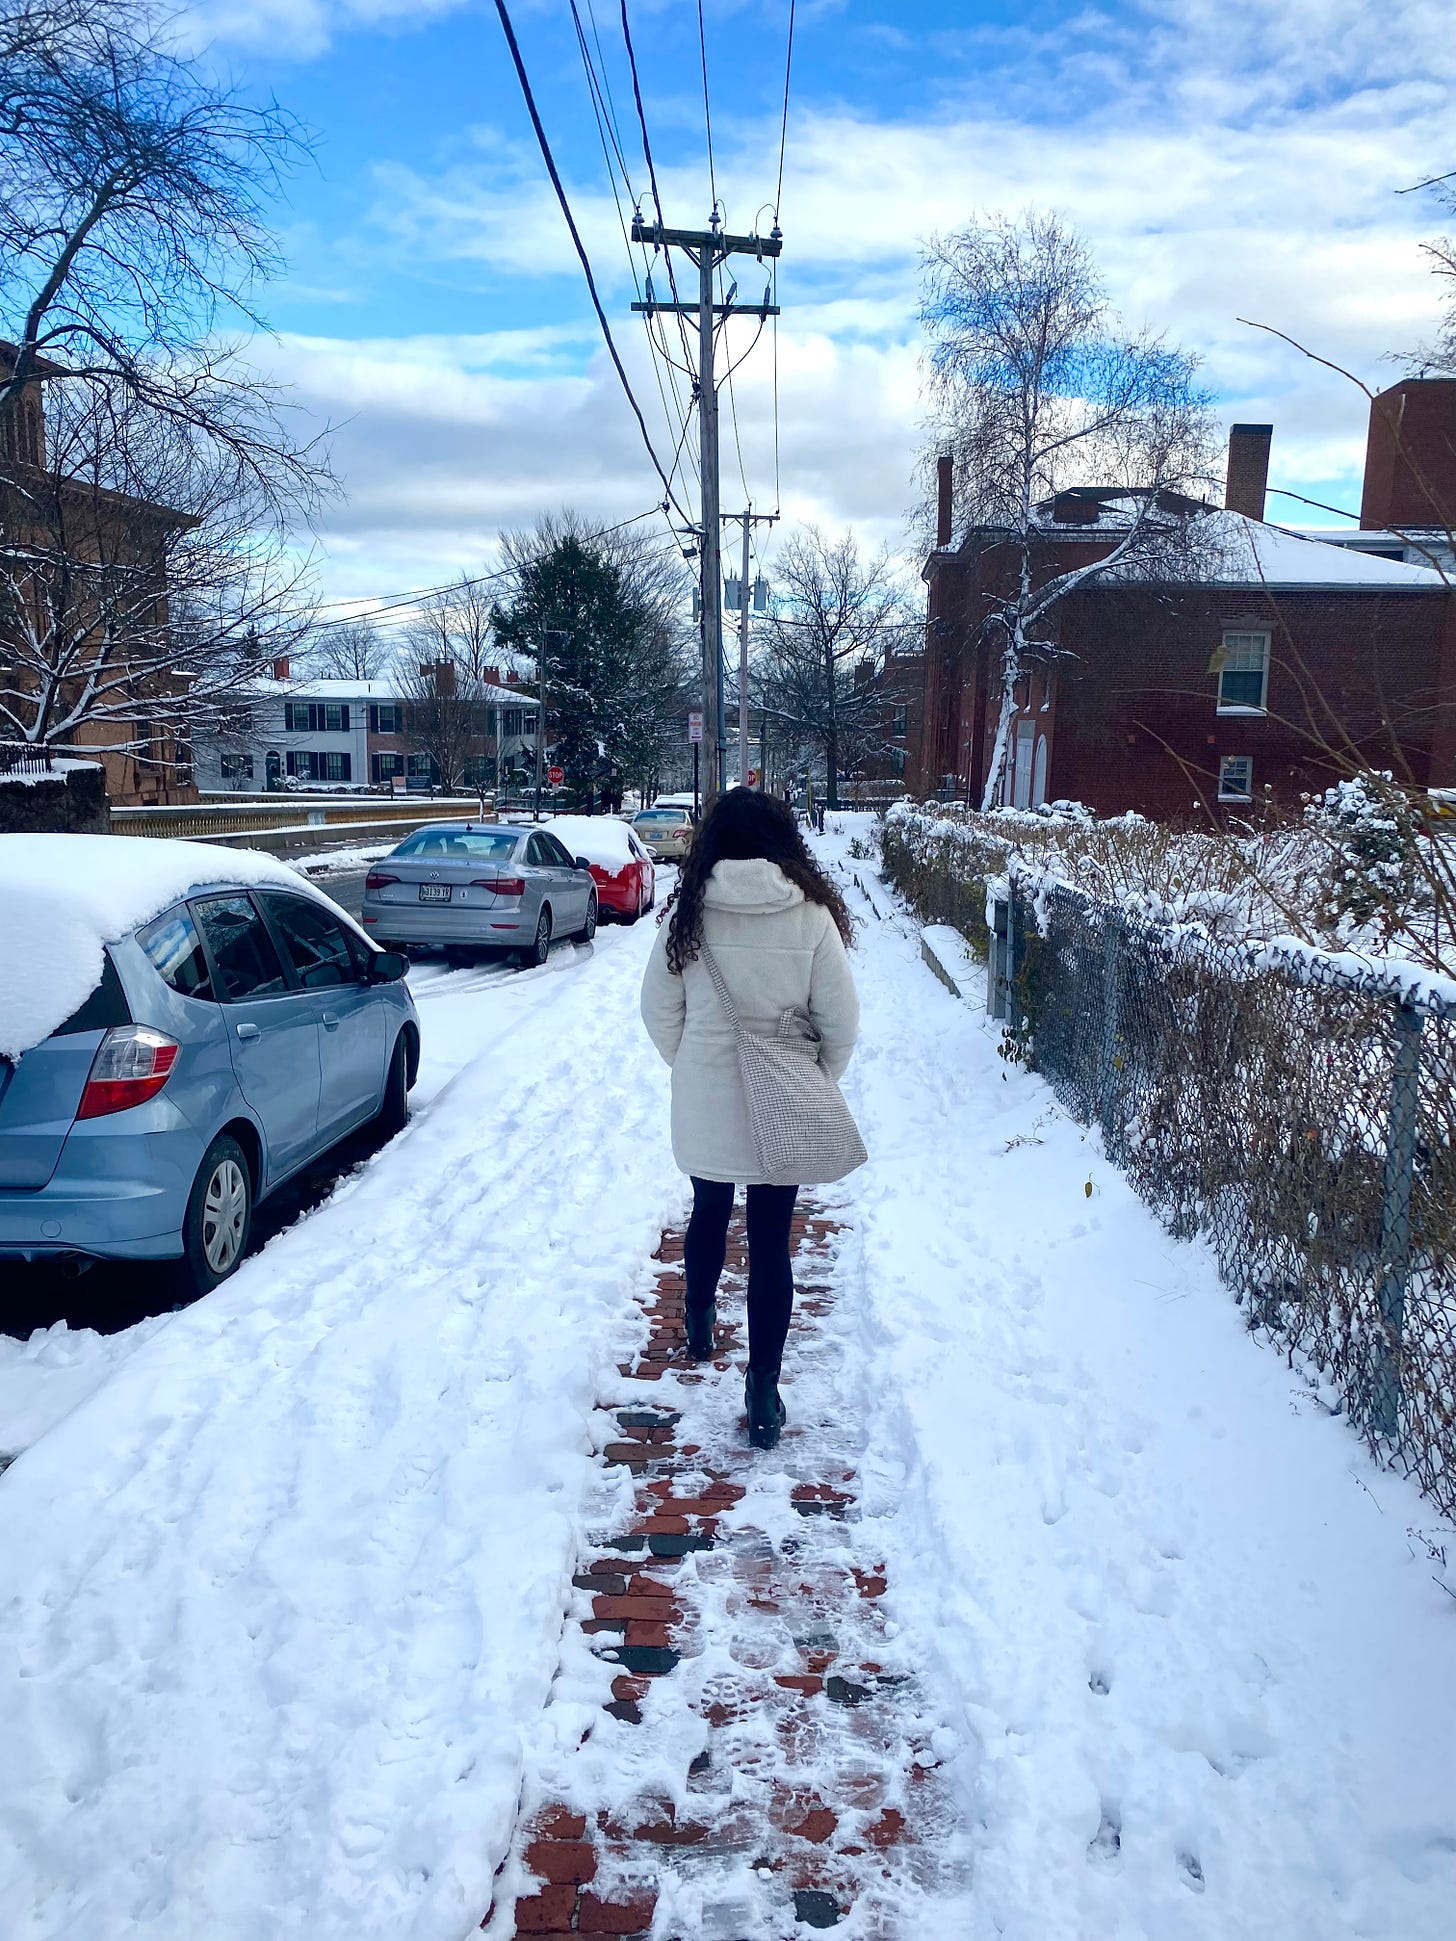 The photo is from behind Isa, who is wearing black pants and boots, a white jacket and white crossbody bag. She's walking down a brick sidewalk that's covered in snow. To her left, parked cars are covered in snow. To her right, a yard is full of snow. Powerlines run overhead, and the sky is partly cloudy.